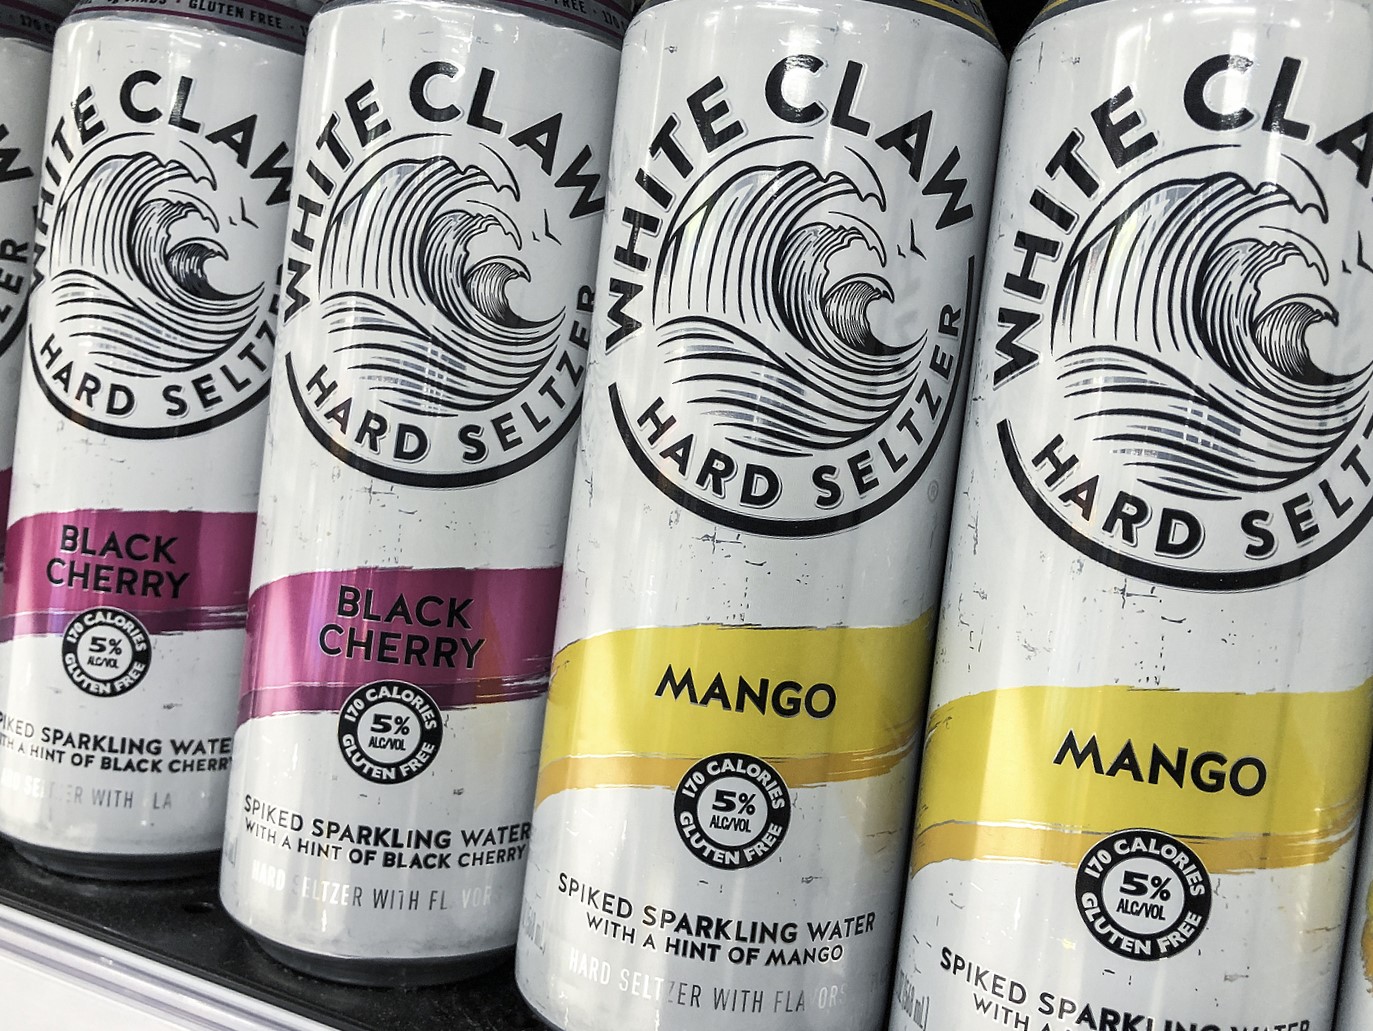 White Claws